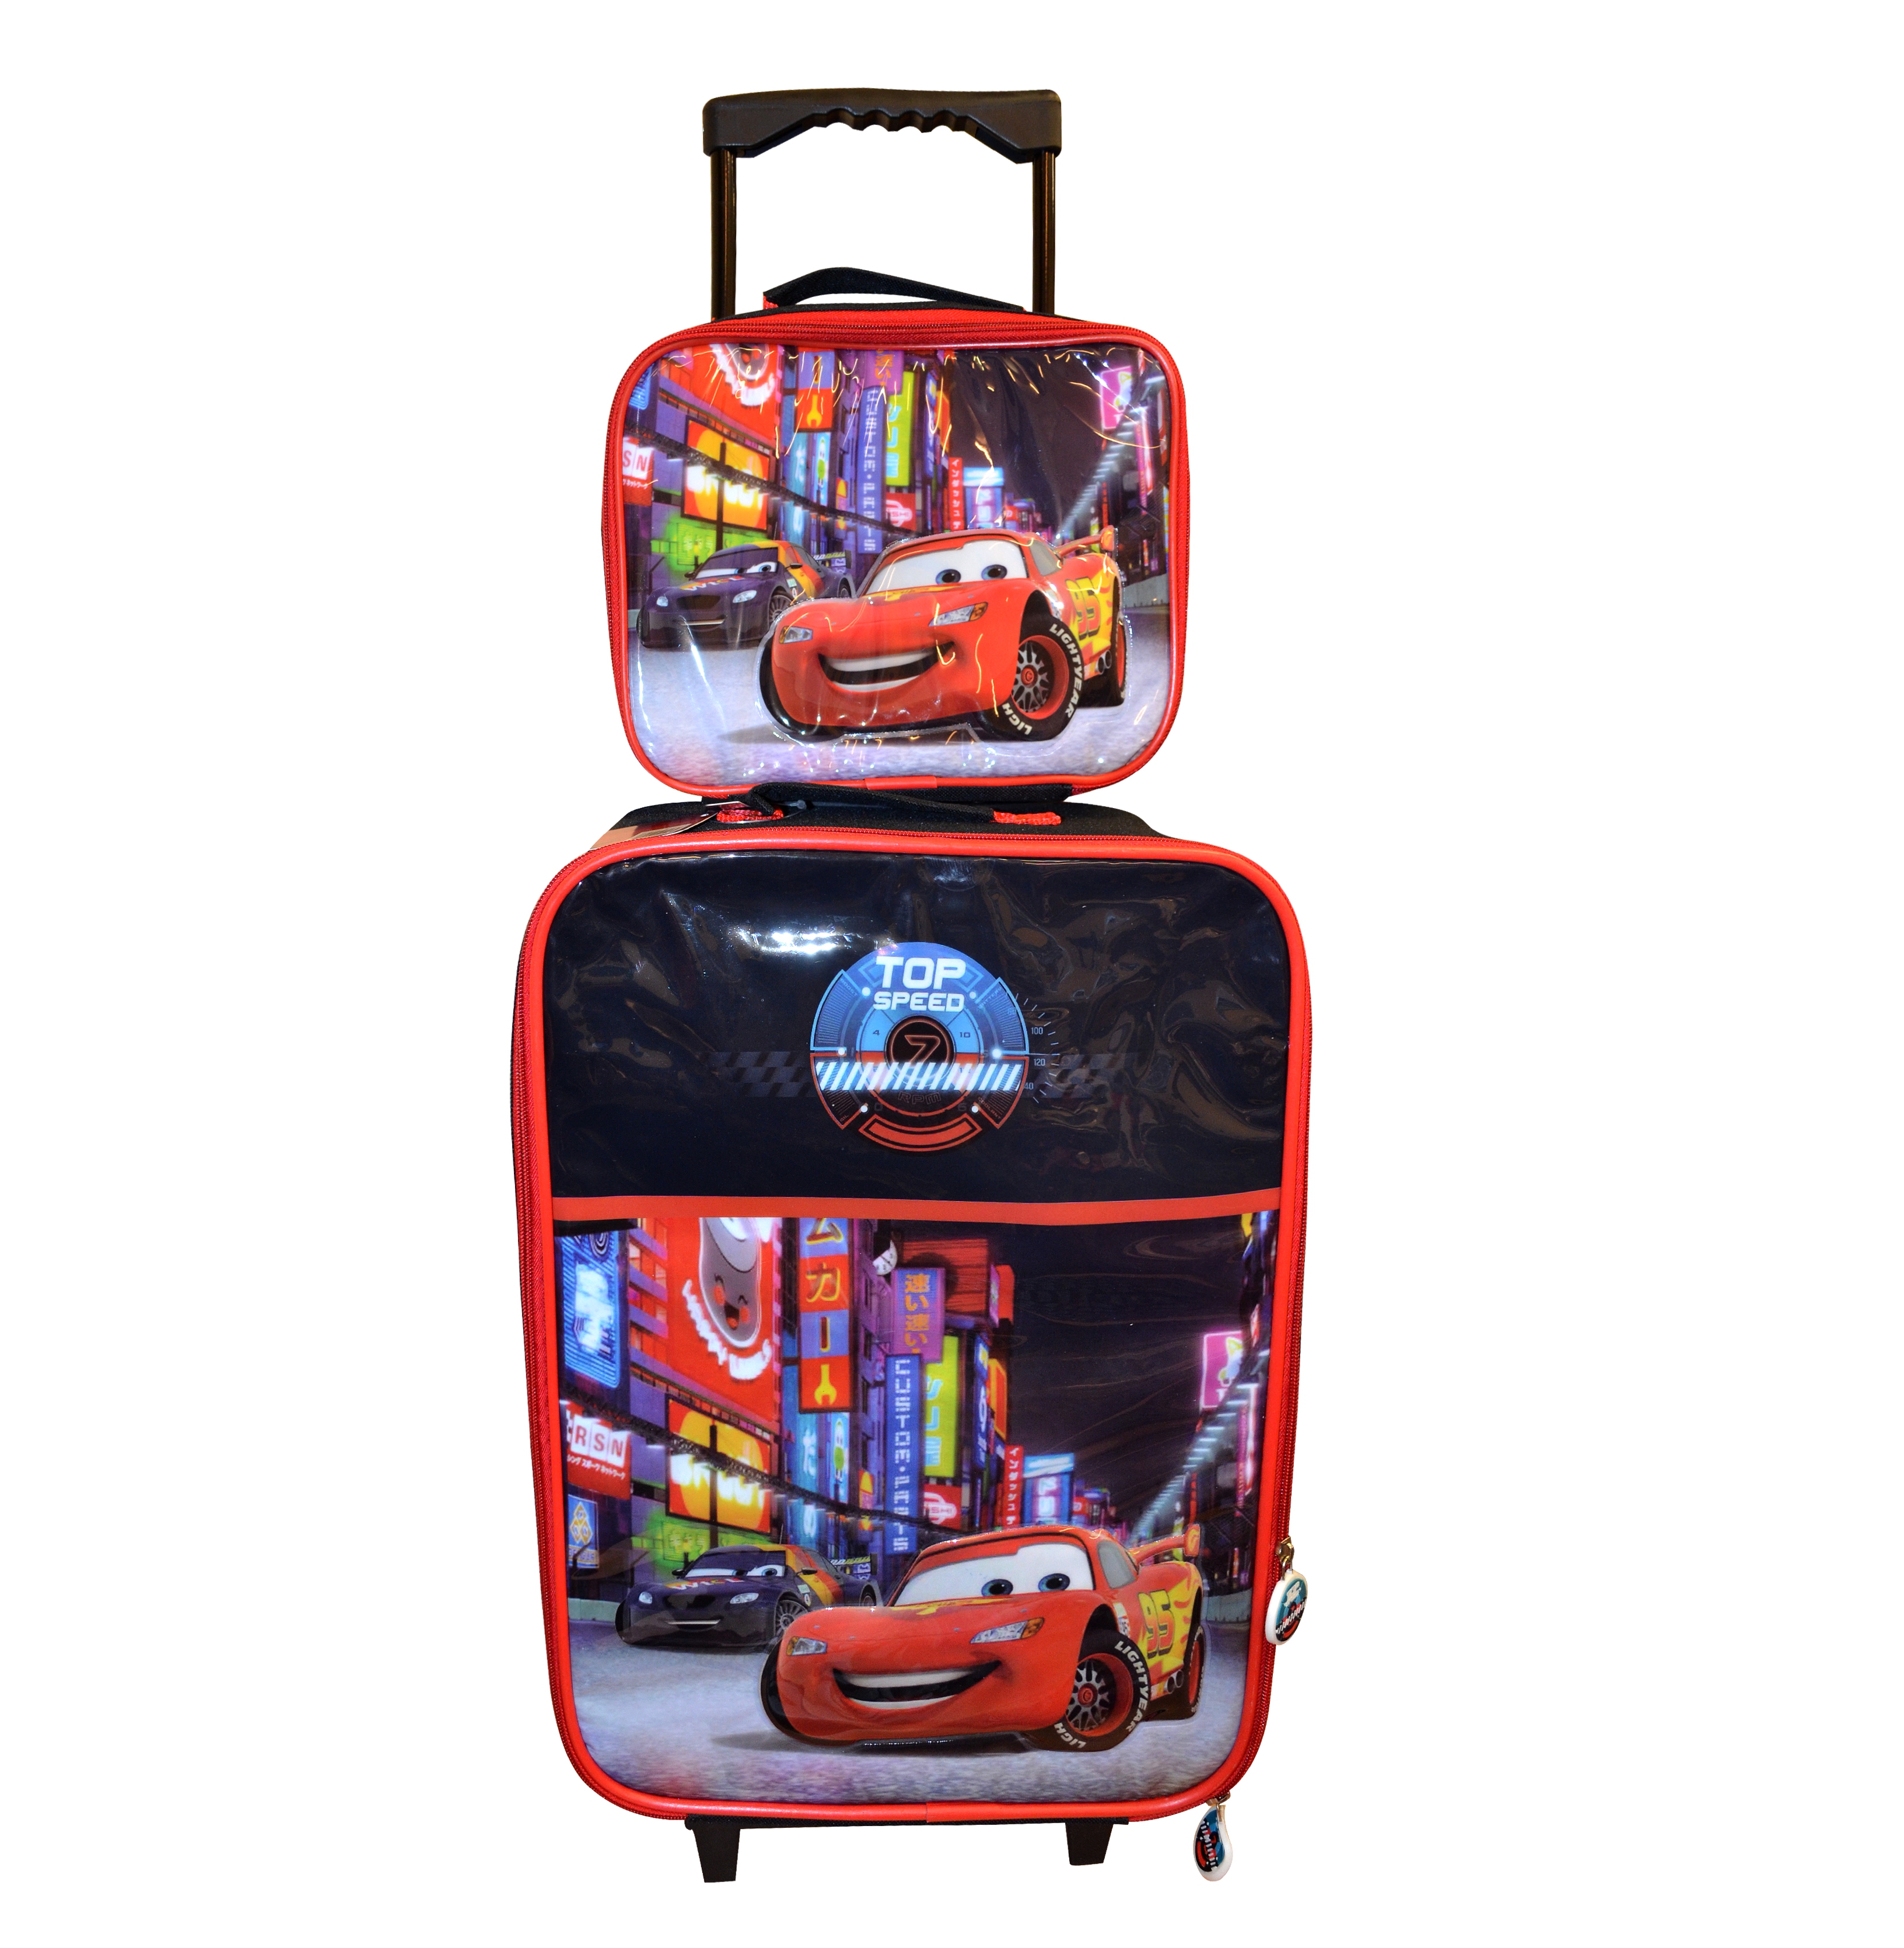 Disney Cars 'Neon' 2 Piece Suitcase with Lunch Bag Luggage Set